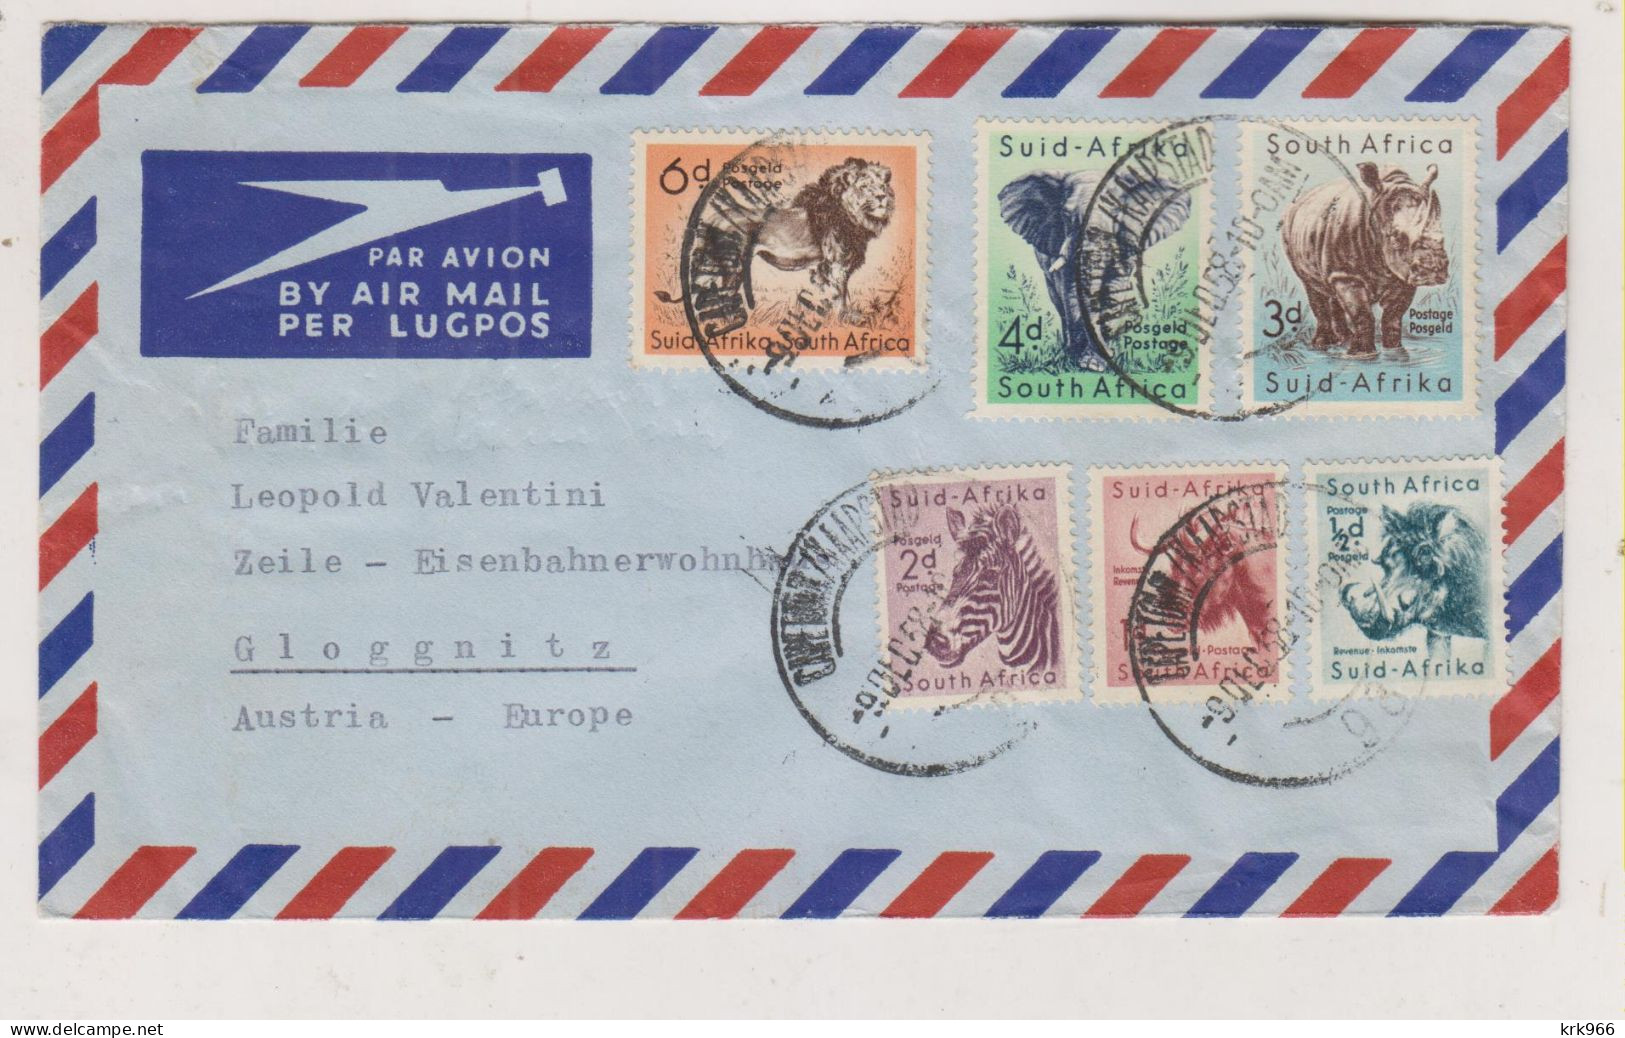 SOUTH AFRICA 1958 CAPE TOWN  Nice   Airmail Cover To Austria - Luftpost